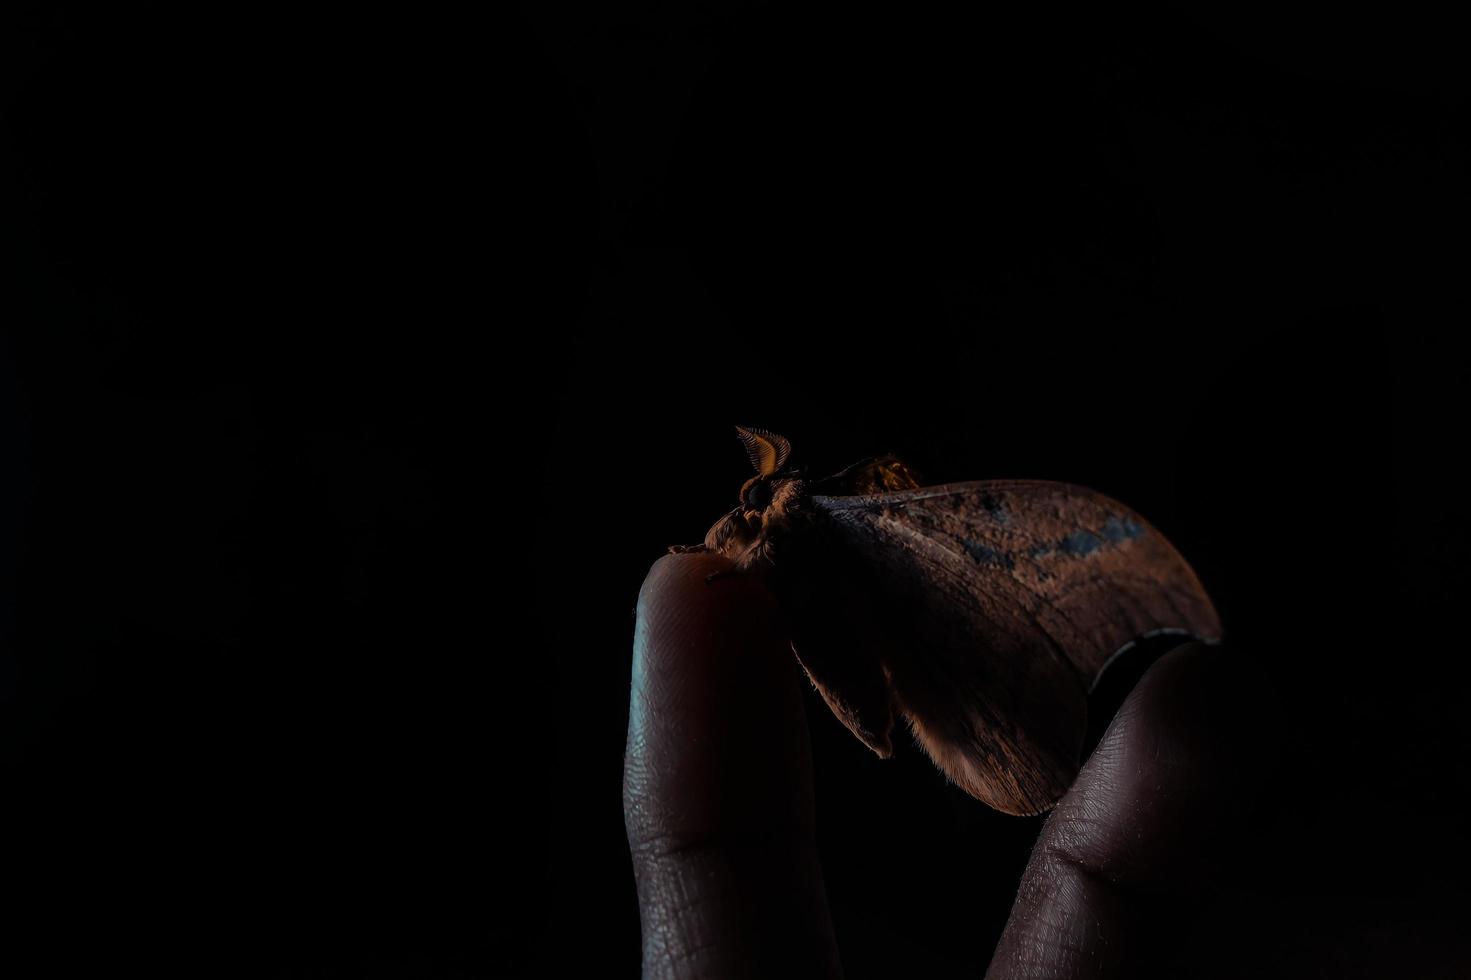 Photo of a moth resting on a man's finger, with the concept of a low key photo so that it produces a strong and dramatic impression. Black and dark background.